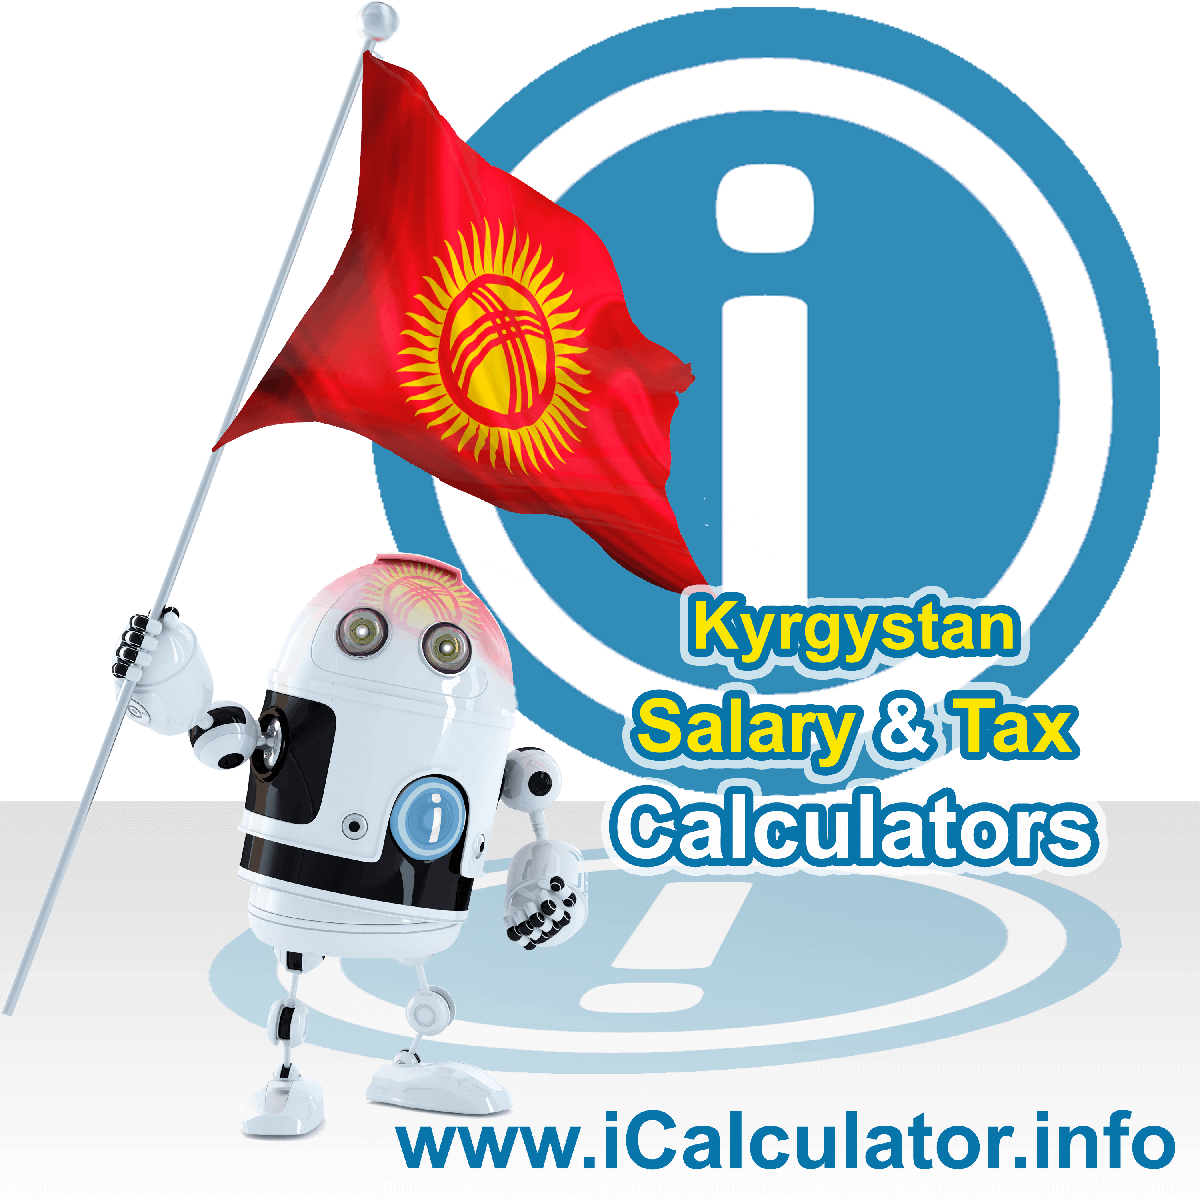 Kyrgyzstan Salary Calculator. This image shows the Kyrgyzstanese flag and information relating to the tax formula for the Kyrgyzstan Tax Calculator